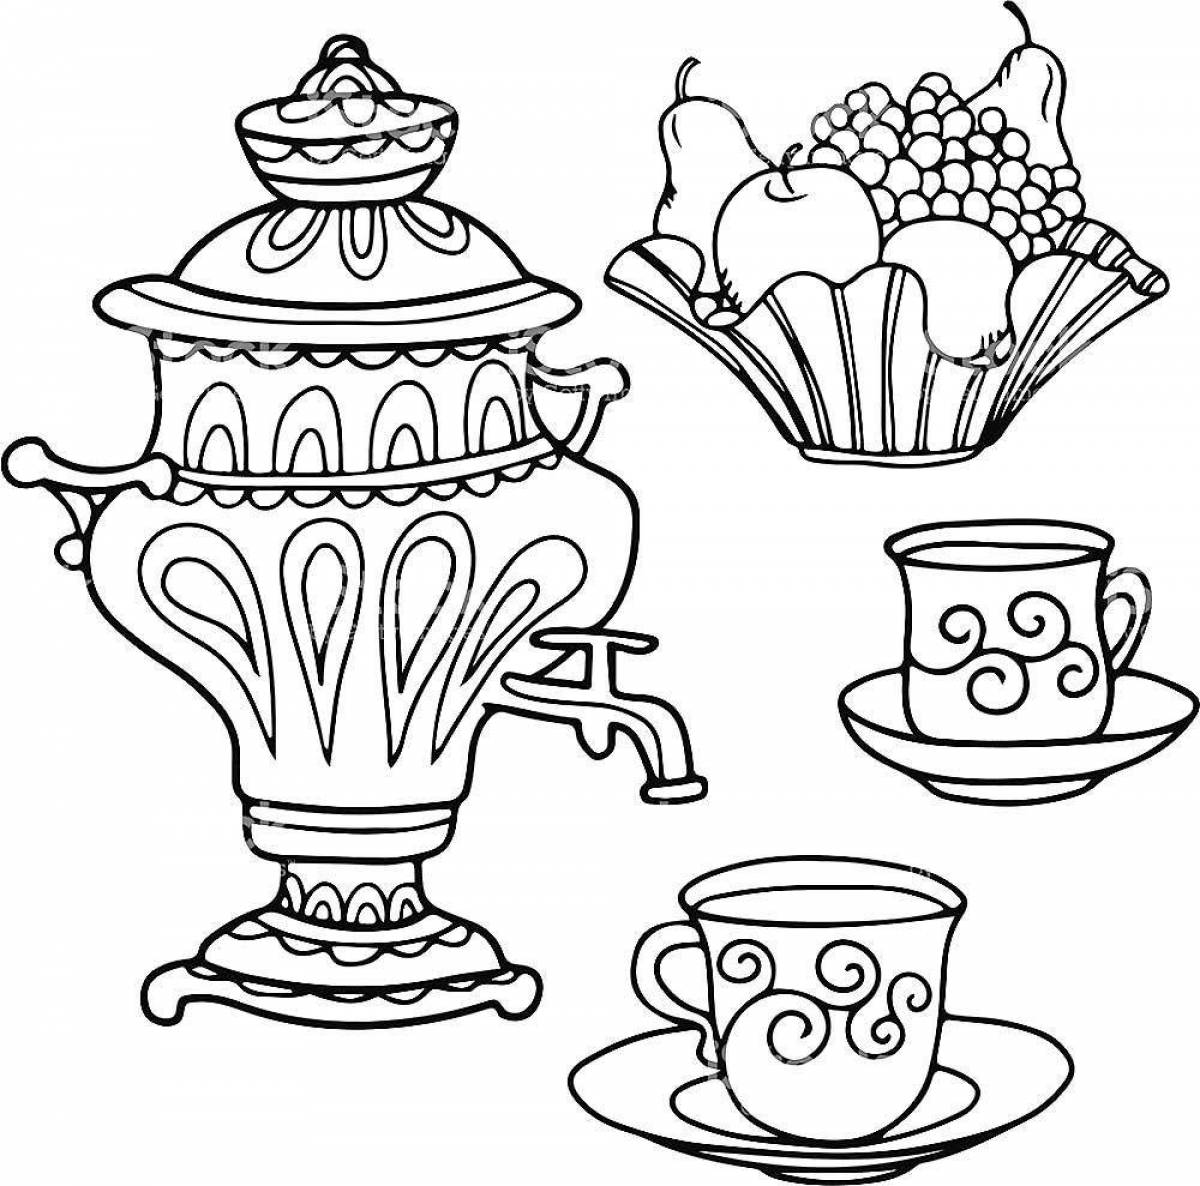 Invitation samovar coloring book for children 5-6 years old